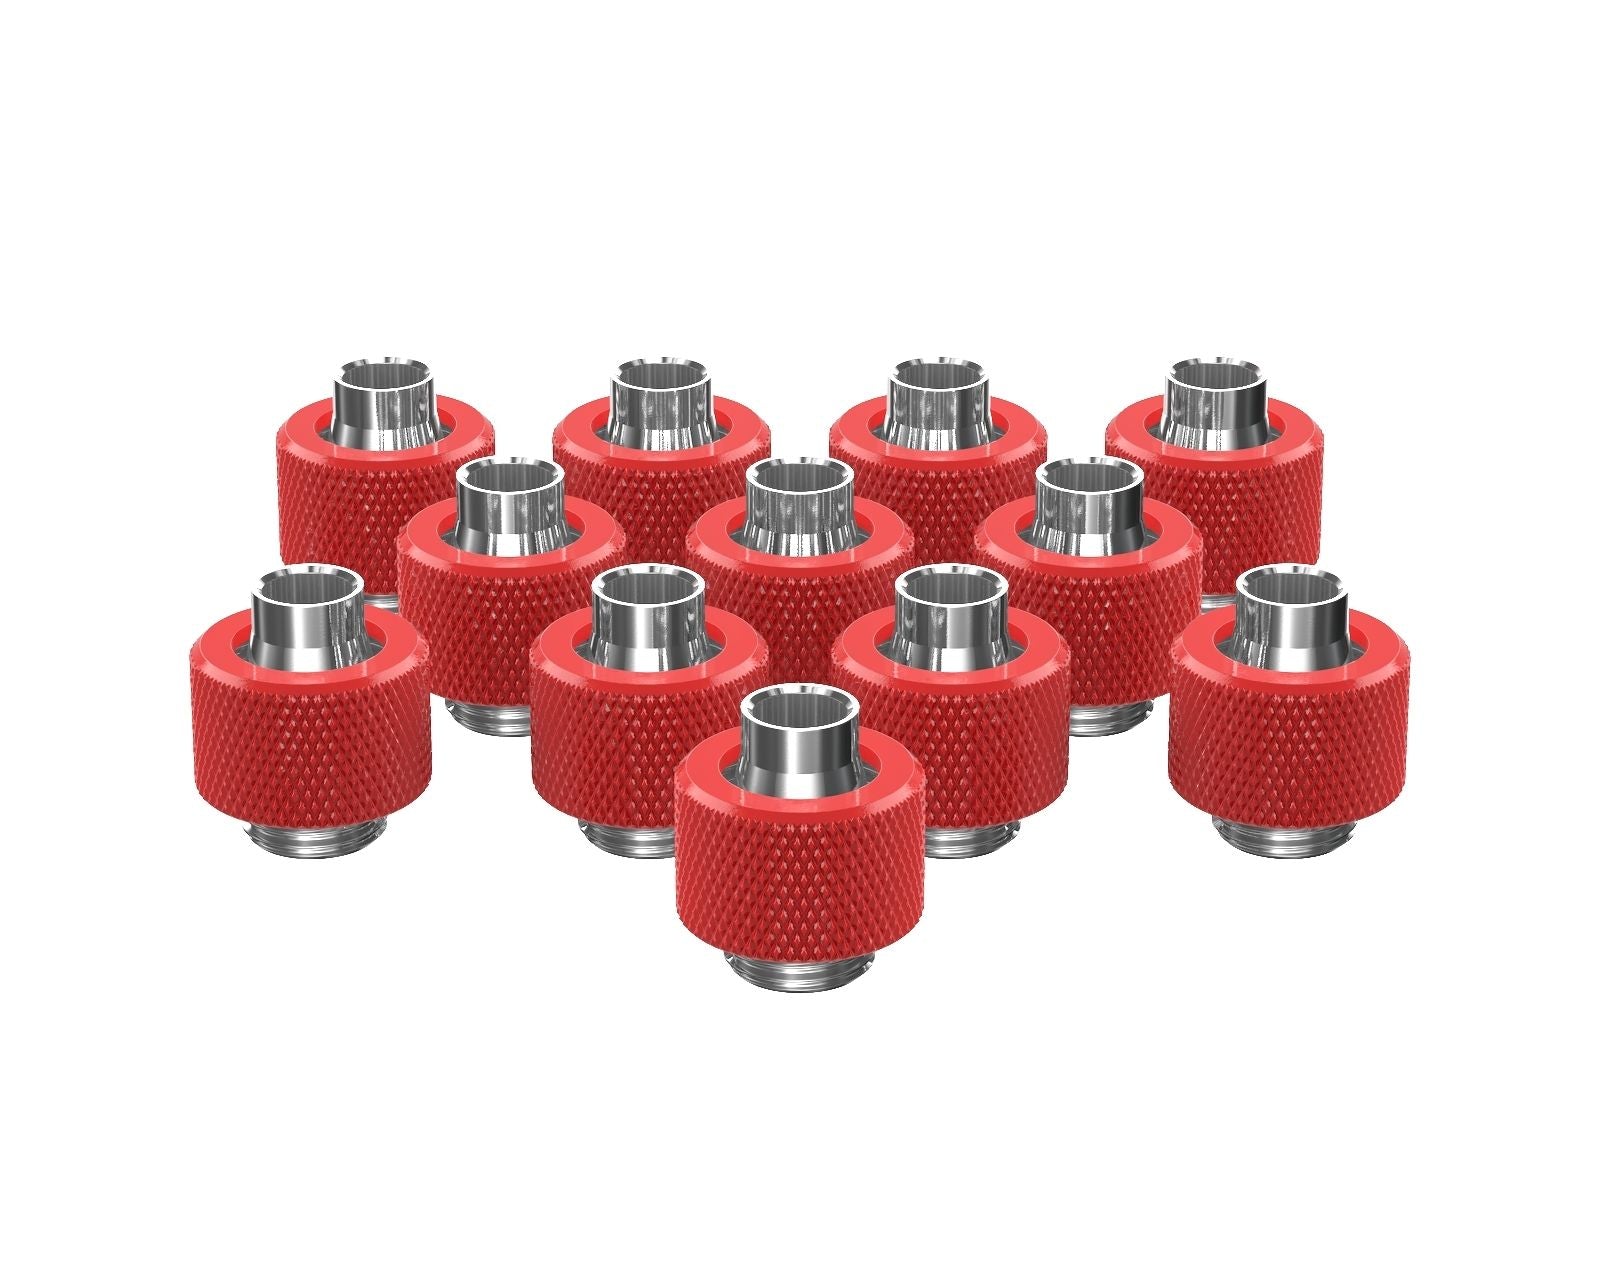 PrimoChill SecureFit SX - Premium Compression Fitting For 3/8in ID x 1/2in OD Flexible Tubing 12 Pack (F-SFSX12-12) - Available in 20+ Colors, Custom Watercooling Loop Ready - Razor Red